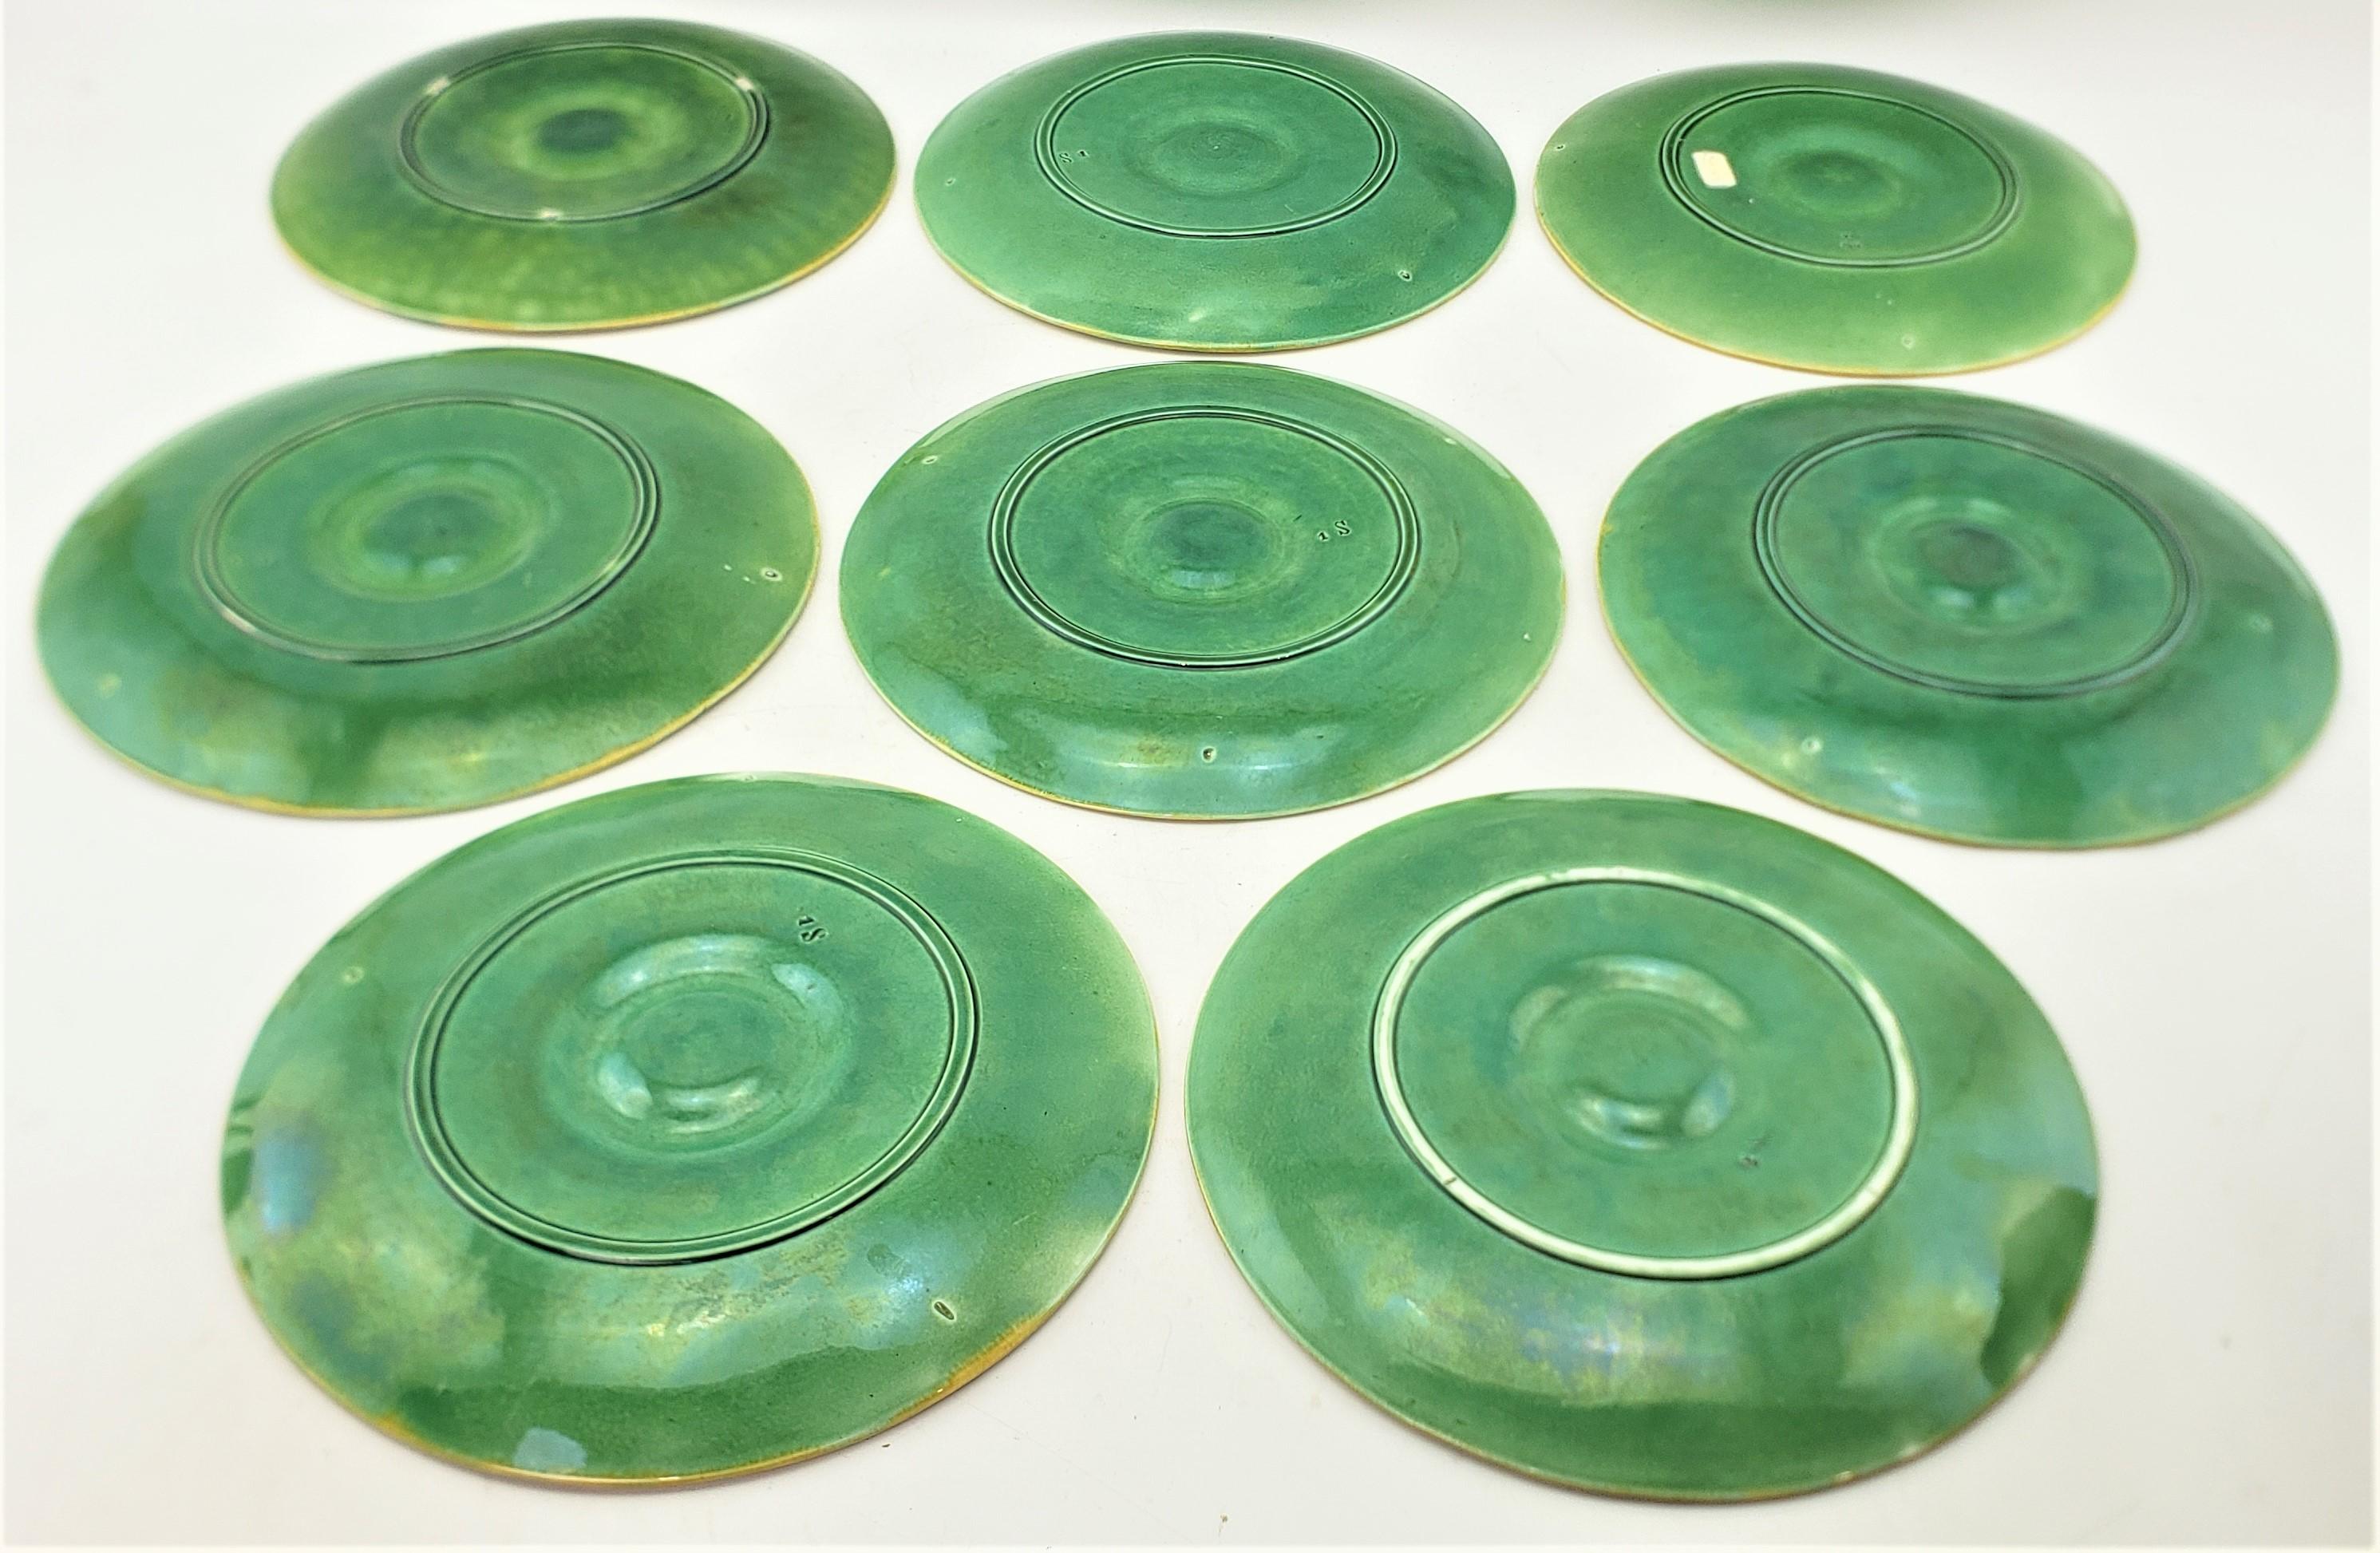 Antique French Majolica Oyster or Seafood Serving Plates Set, 8 Pieces For Sale 2